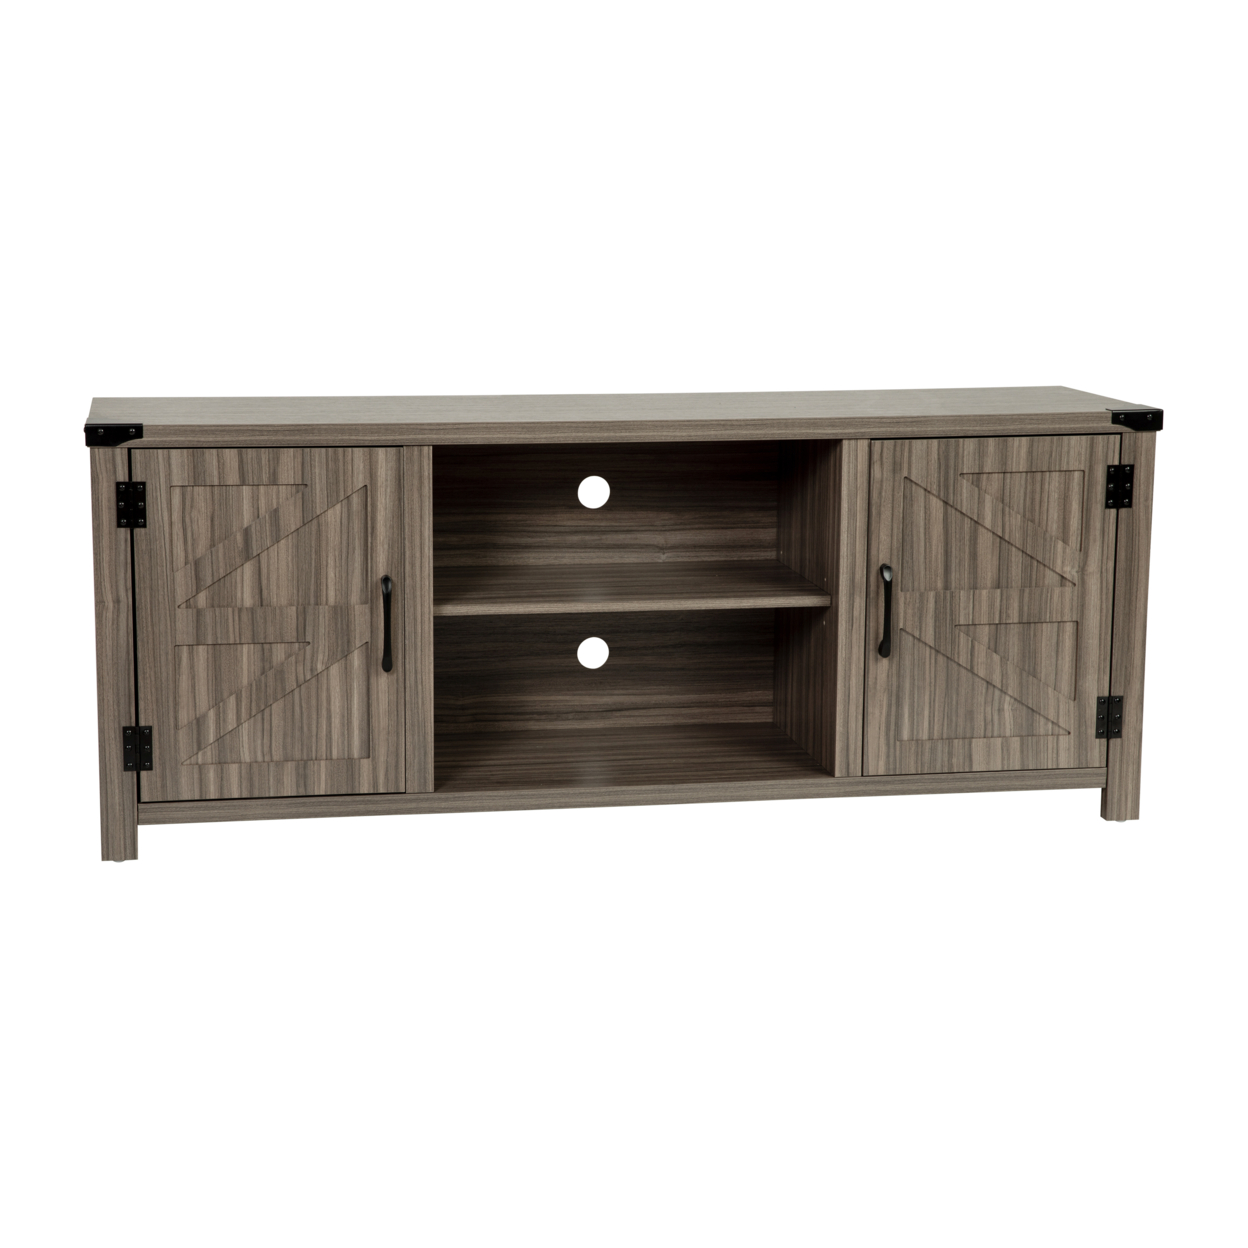 Ayrith Modern Farmhouse Barn Door TV Stand - Gray Wash Oak For TV's Up To 65 Inches - 59 Entertainment Center With Adjustable Shelf